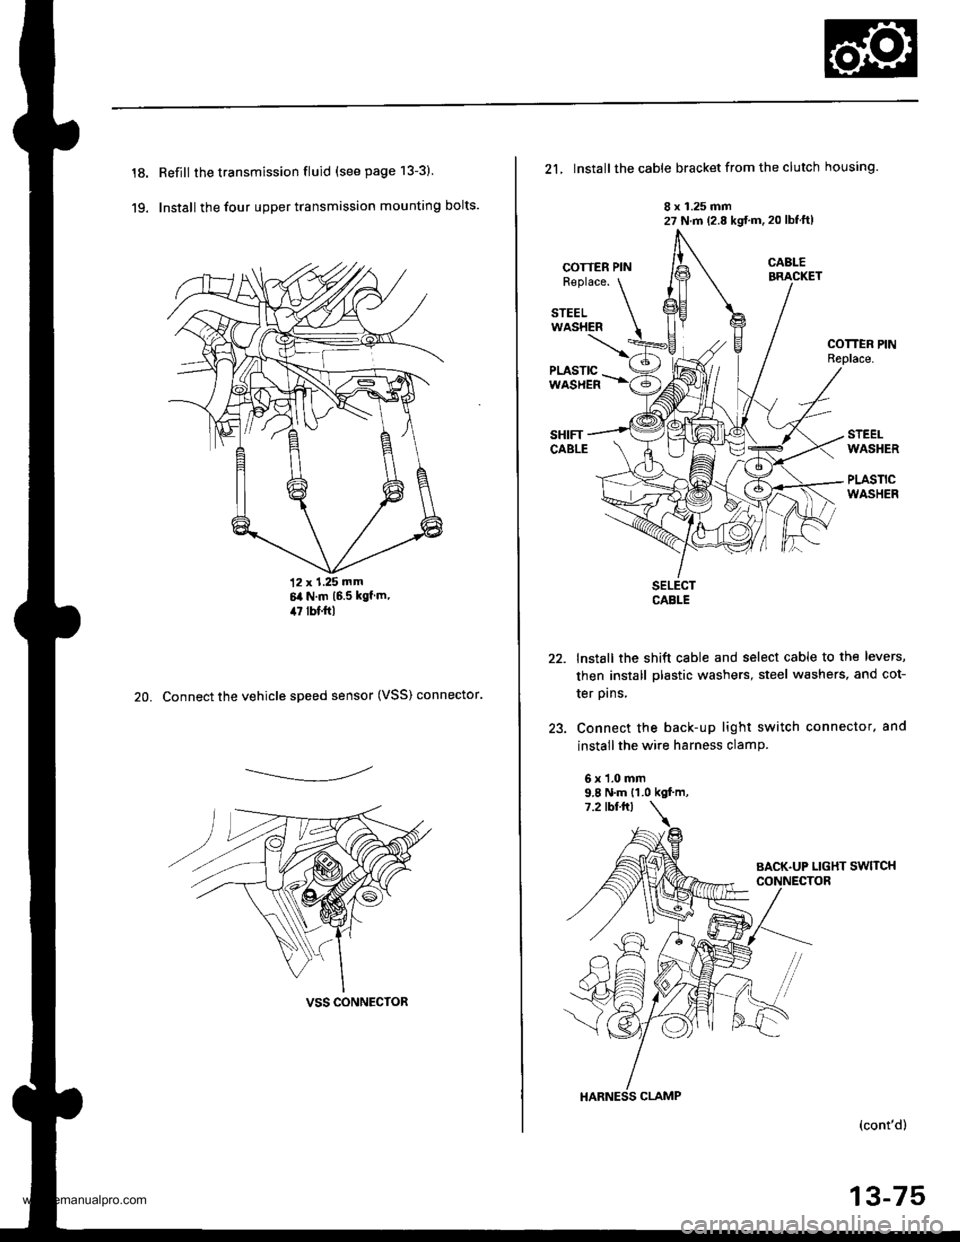 HONDA CR-V 1997 RD1-RD3 / 1.G User Guide 
18.
19.
Refill the transmission fluid (see page 13-3)
Install the four upper transmission mounting bolts.
12 x 1.25 mm6it N.m 16.5 kgf m,il7 lbf.ftl
20. Connect the vehicle speed sensor (VSS) connect